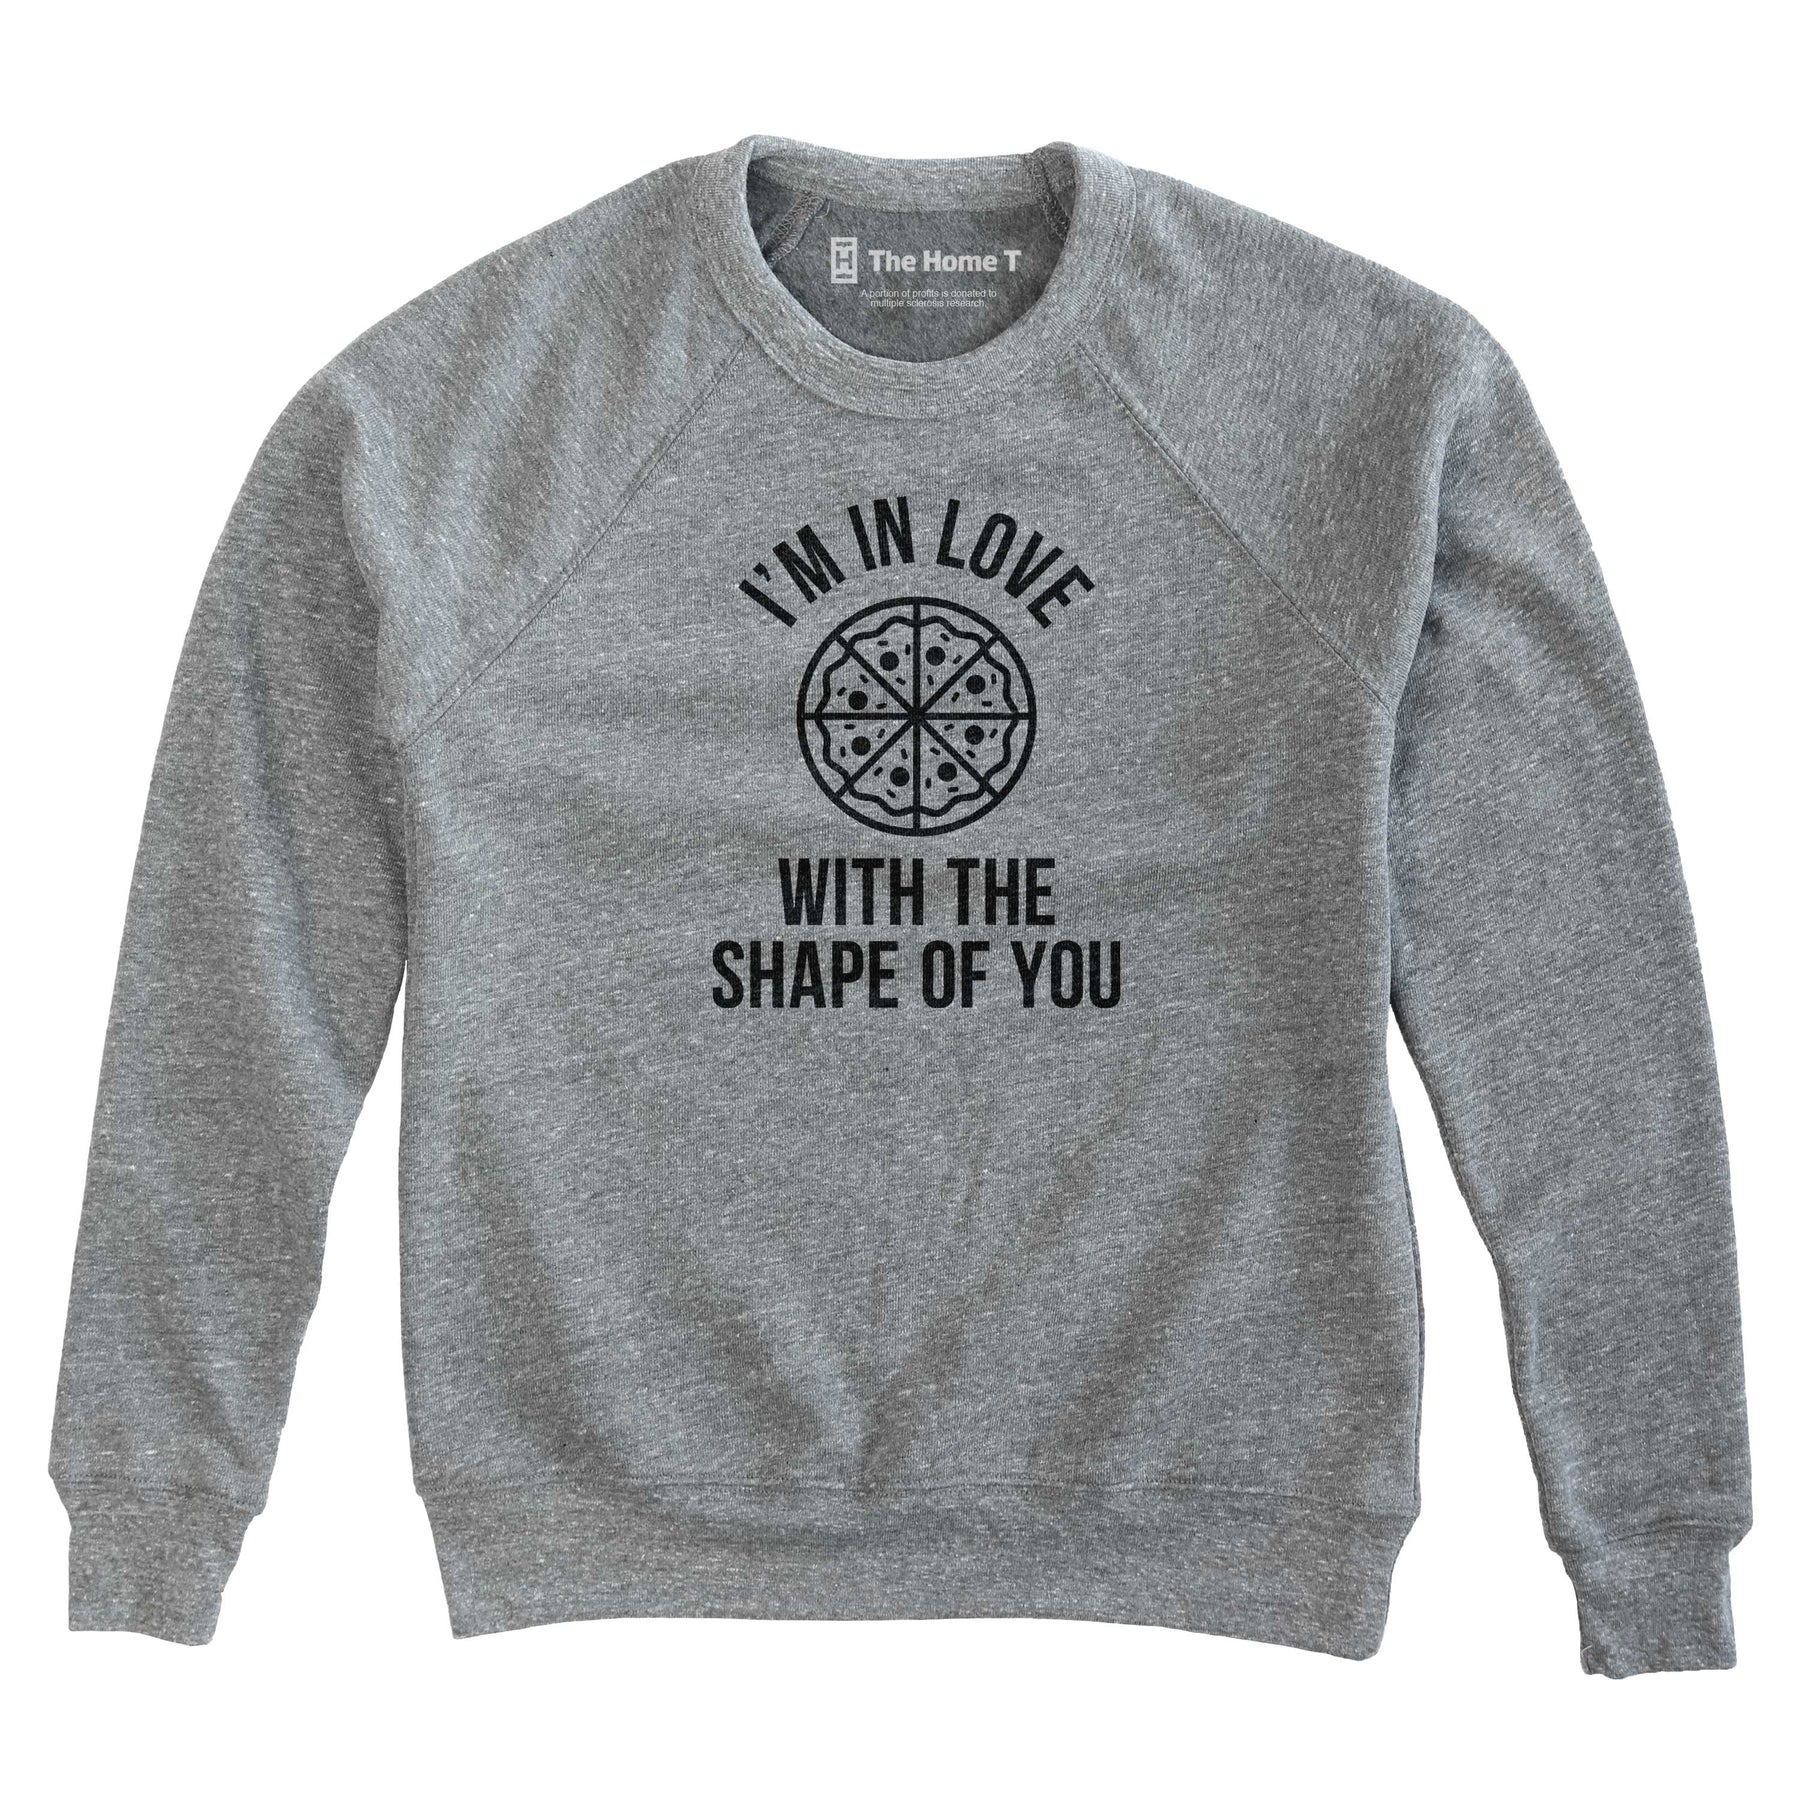 I'm in love with the shape of you. Athletic Grey sweatshirt